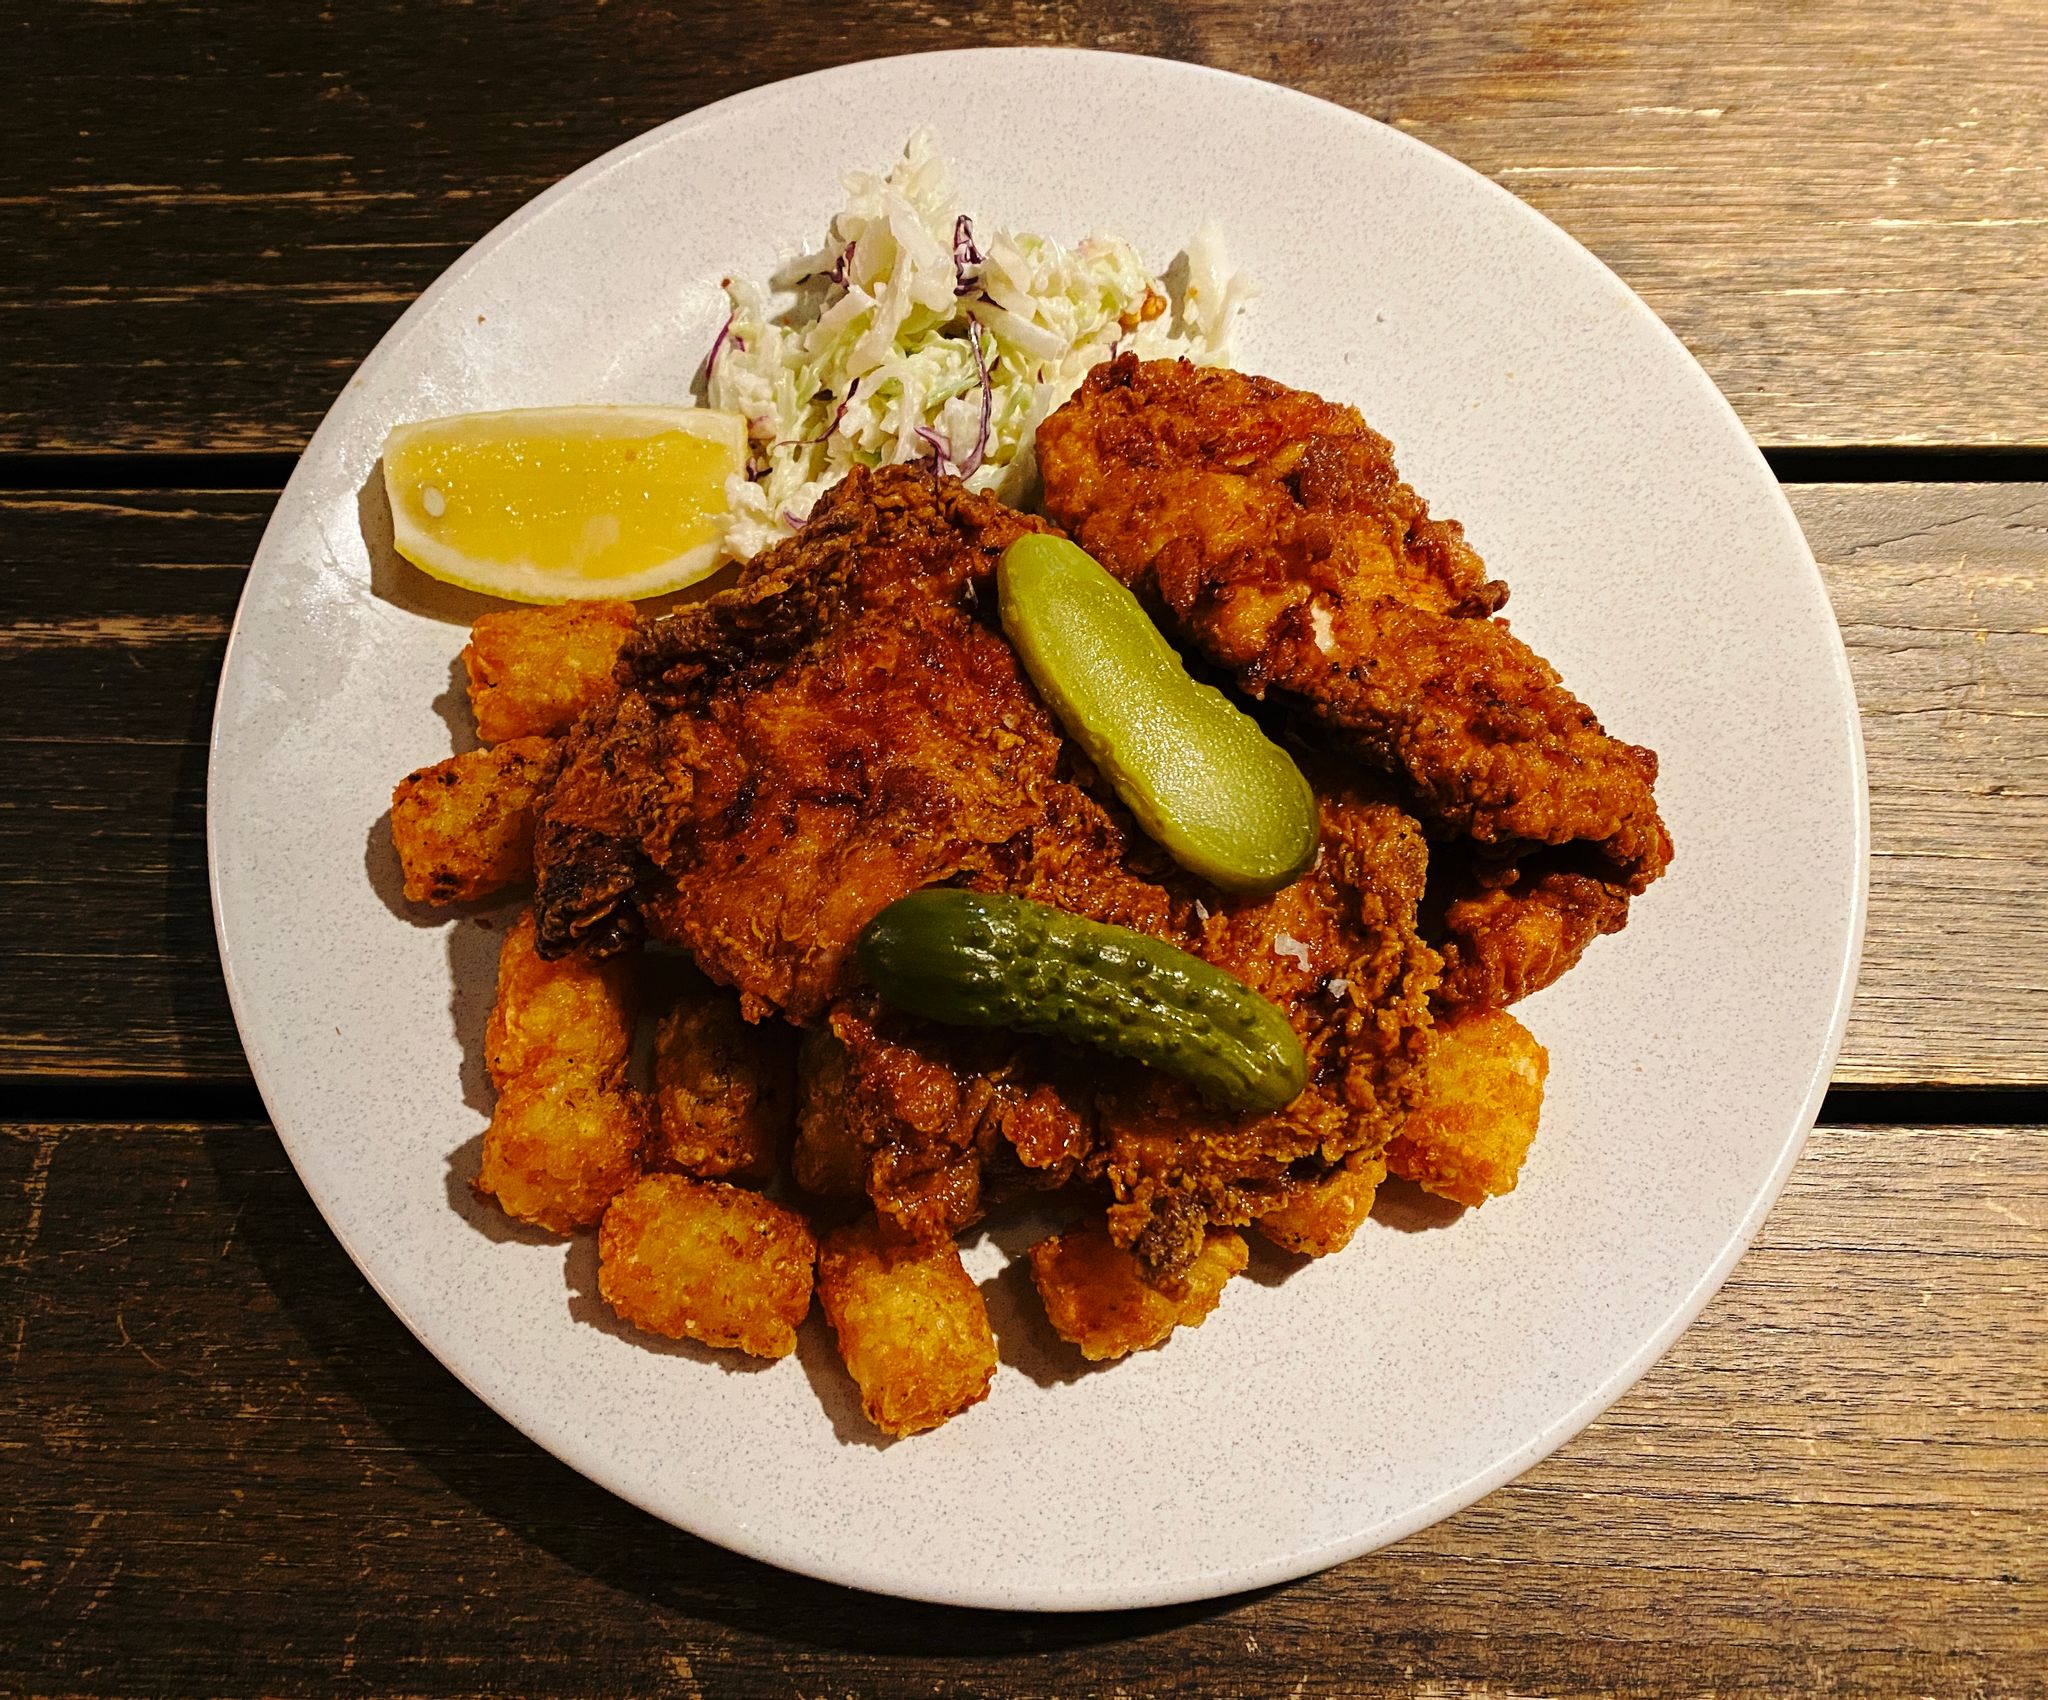 A photo of a plate of Southern fried chicken on top of potato gems with slaw on the side.